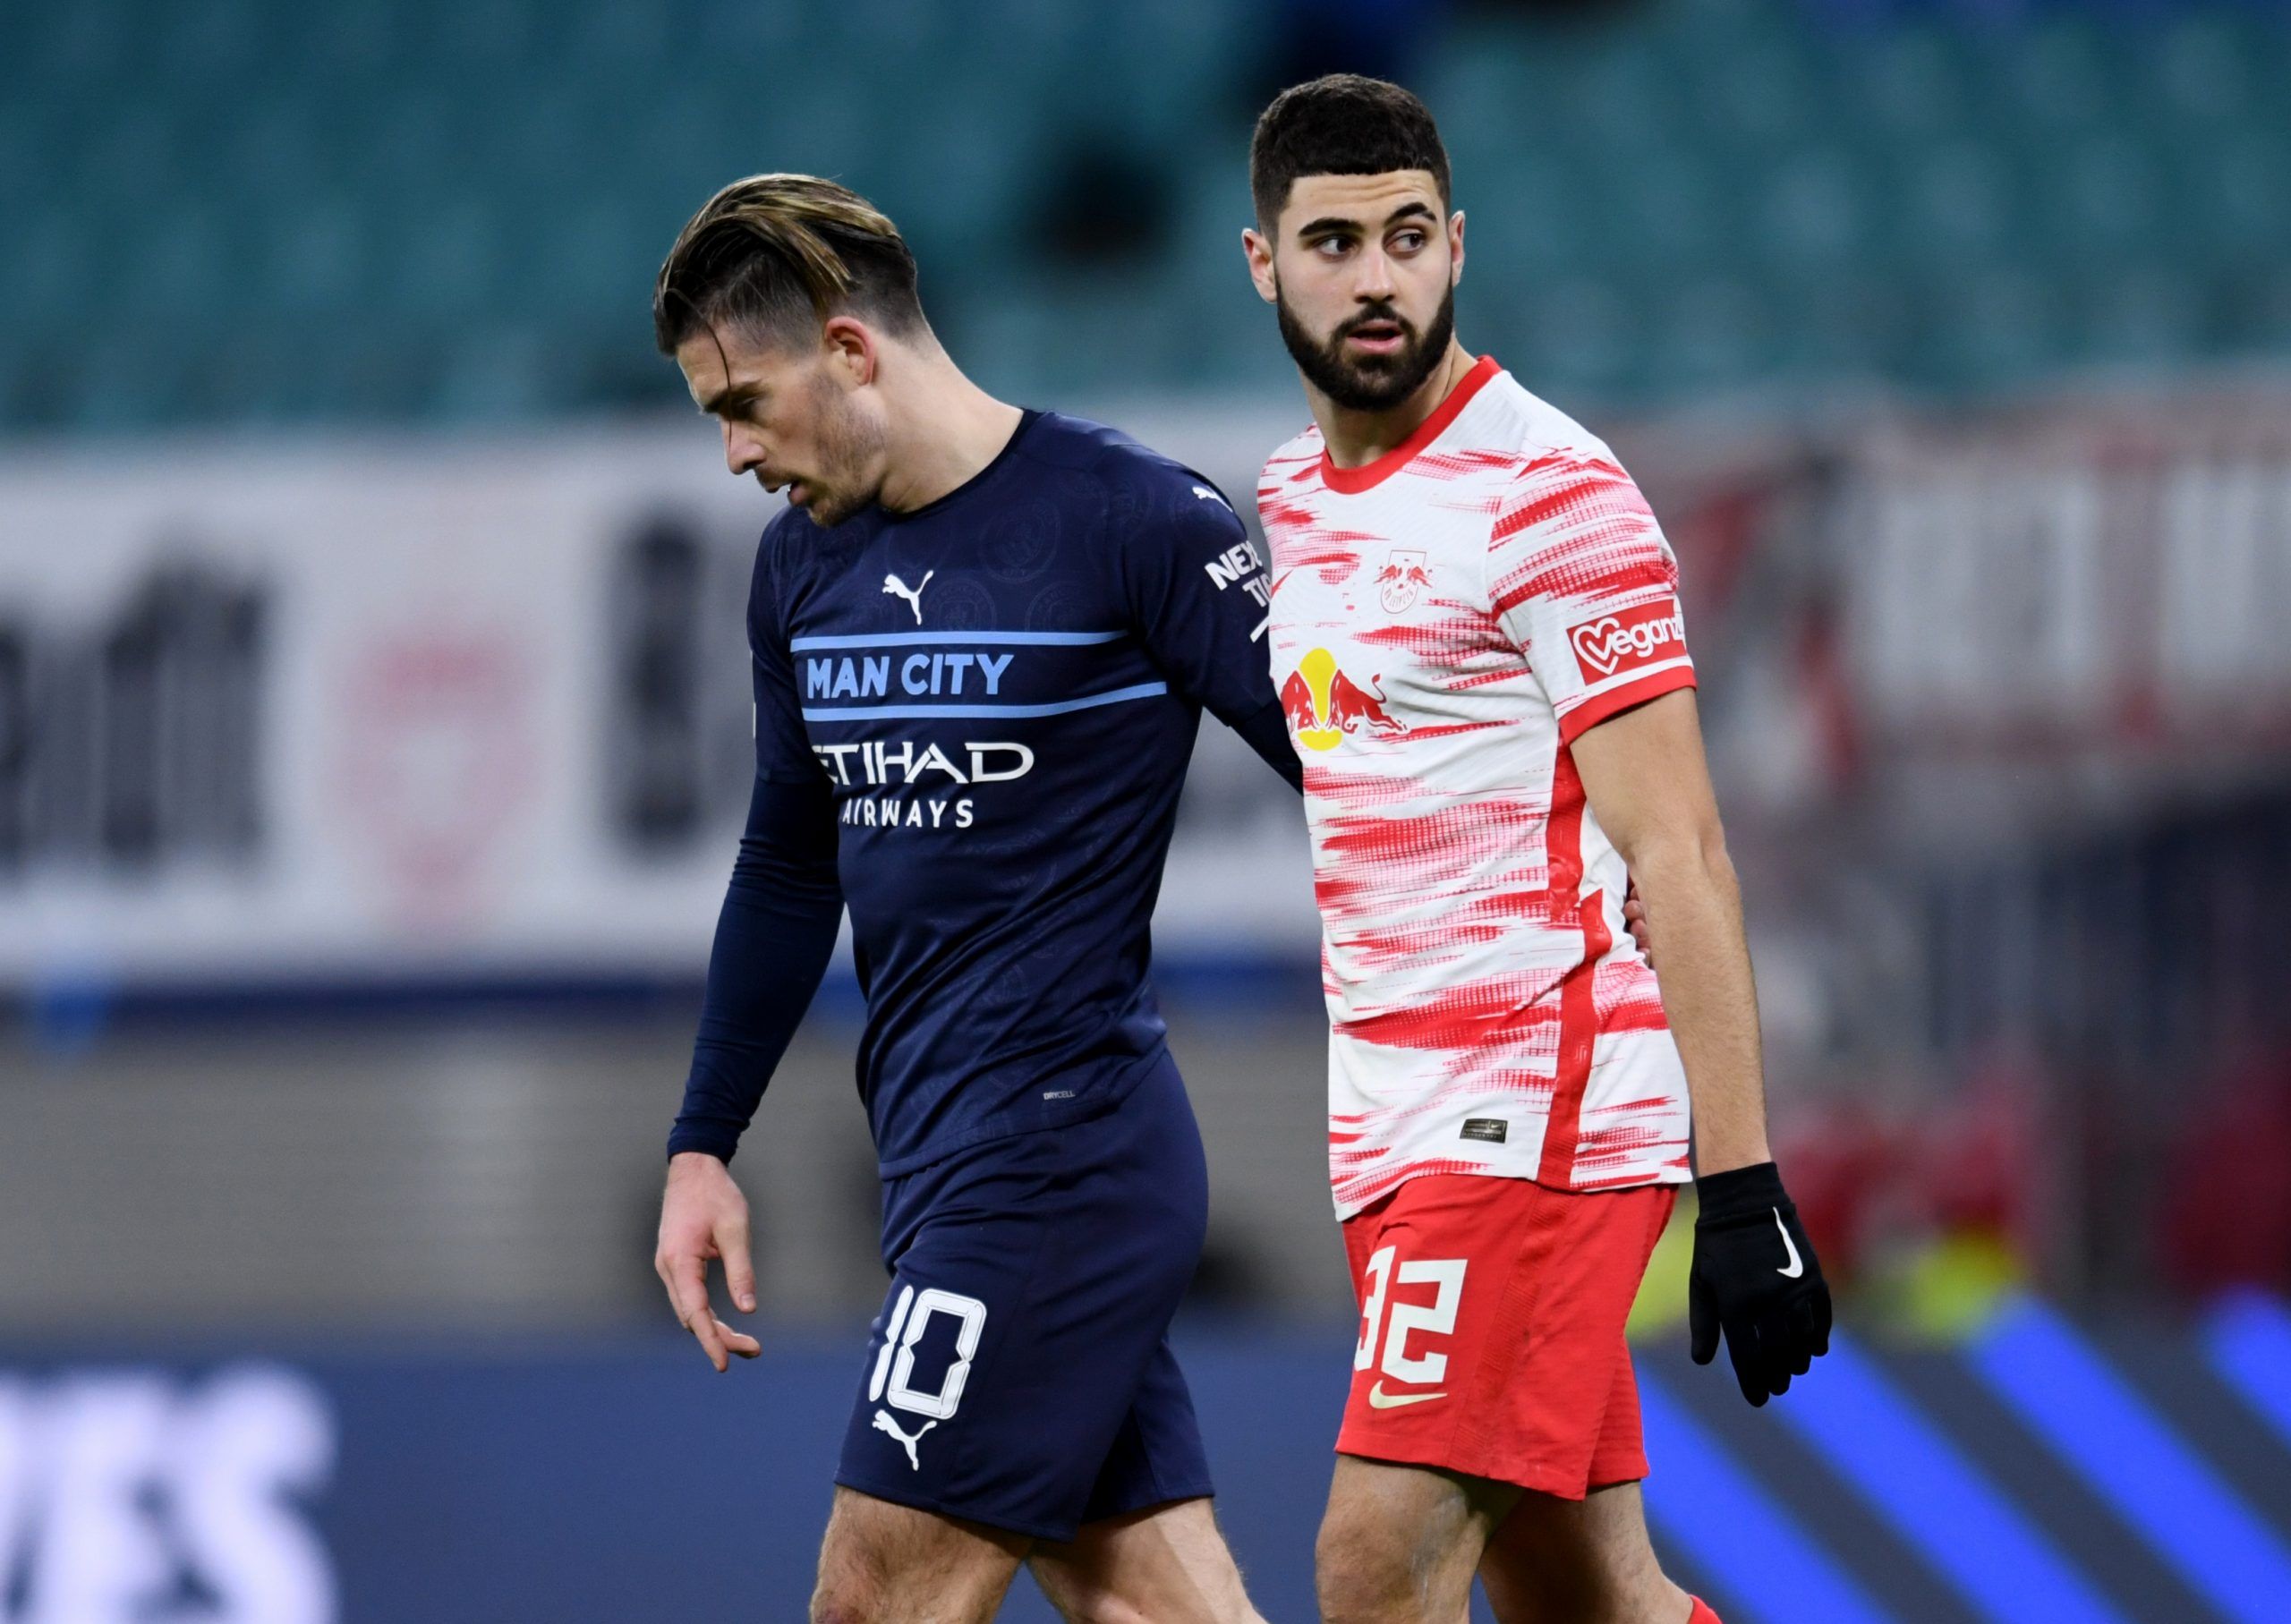 Soccer Football - Champions League - Group A - RB Leipzig v Manchester City - Red Bull Arena, Leipzig, Germany - December 7, 2021 Manchester City's Jack Grealish with RB Leipzig's Josko Gvardiol after the match REUTERS/Annegret Hilse